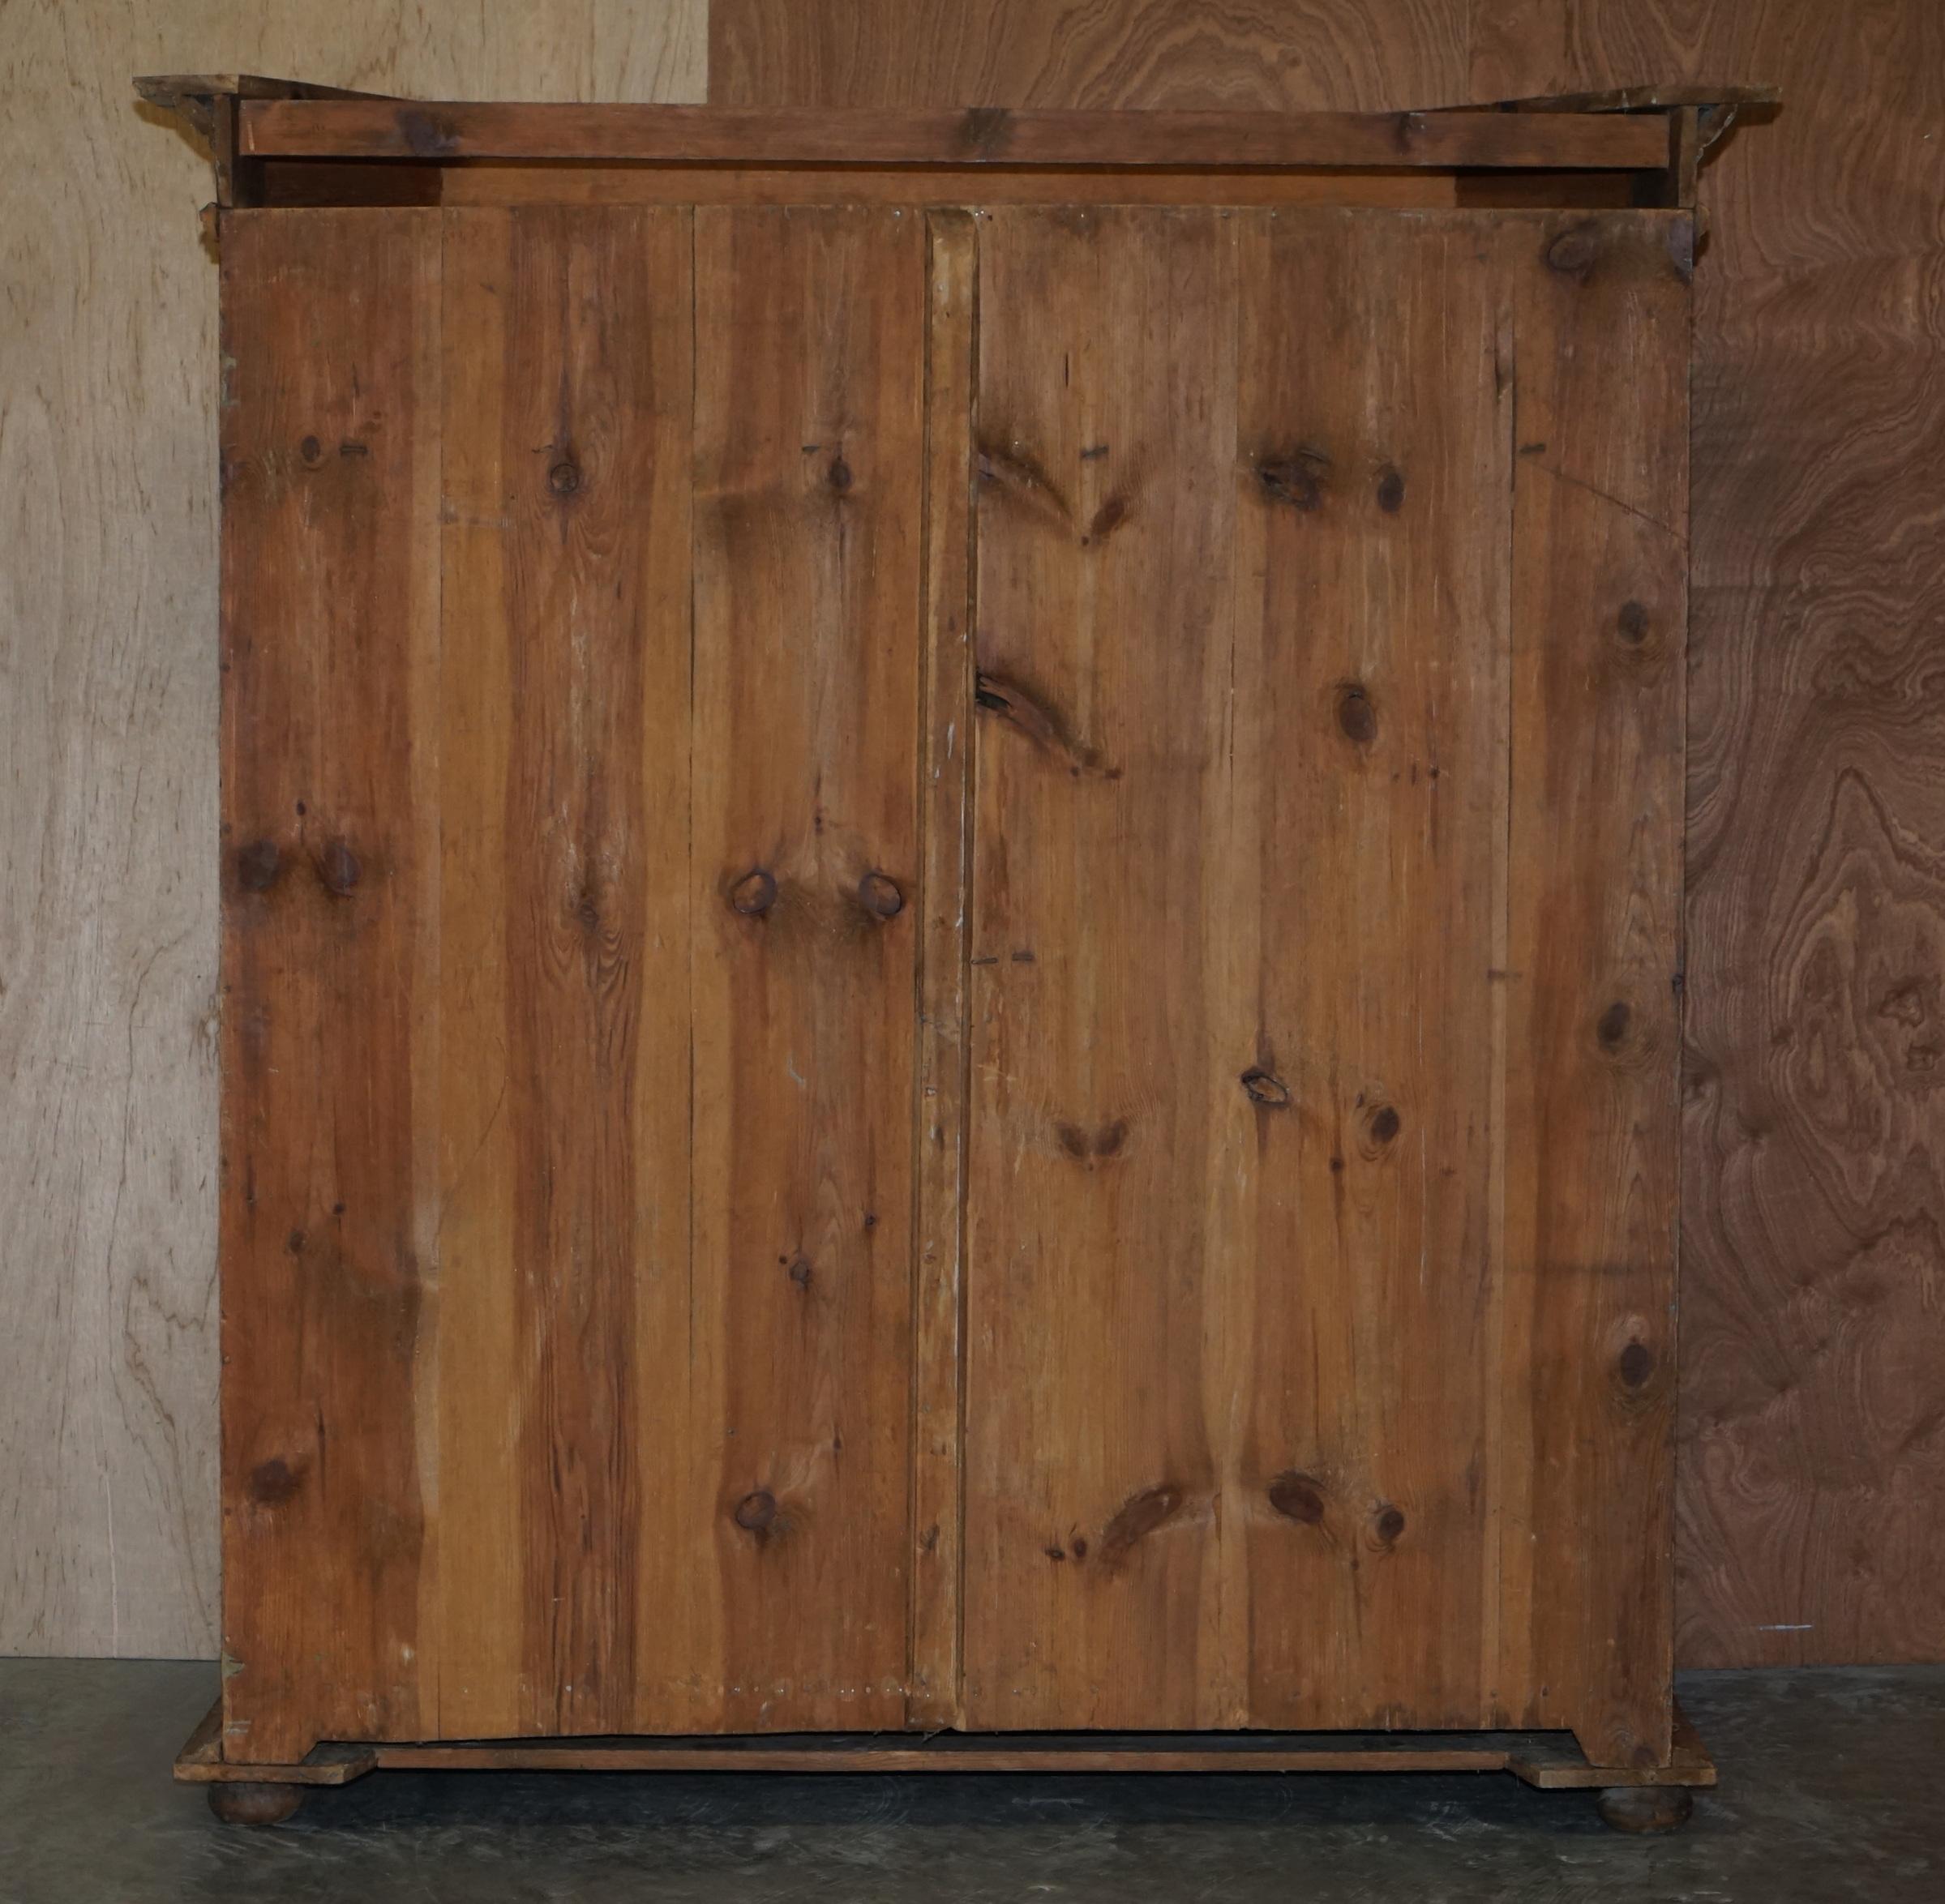 circa 1800 Sublime Hand Painted European Wardrobe or House Cupboard in Solid Oak For Sale 7